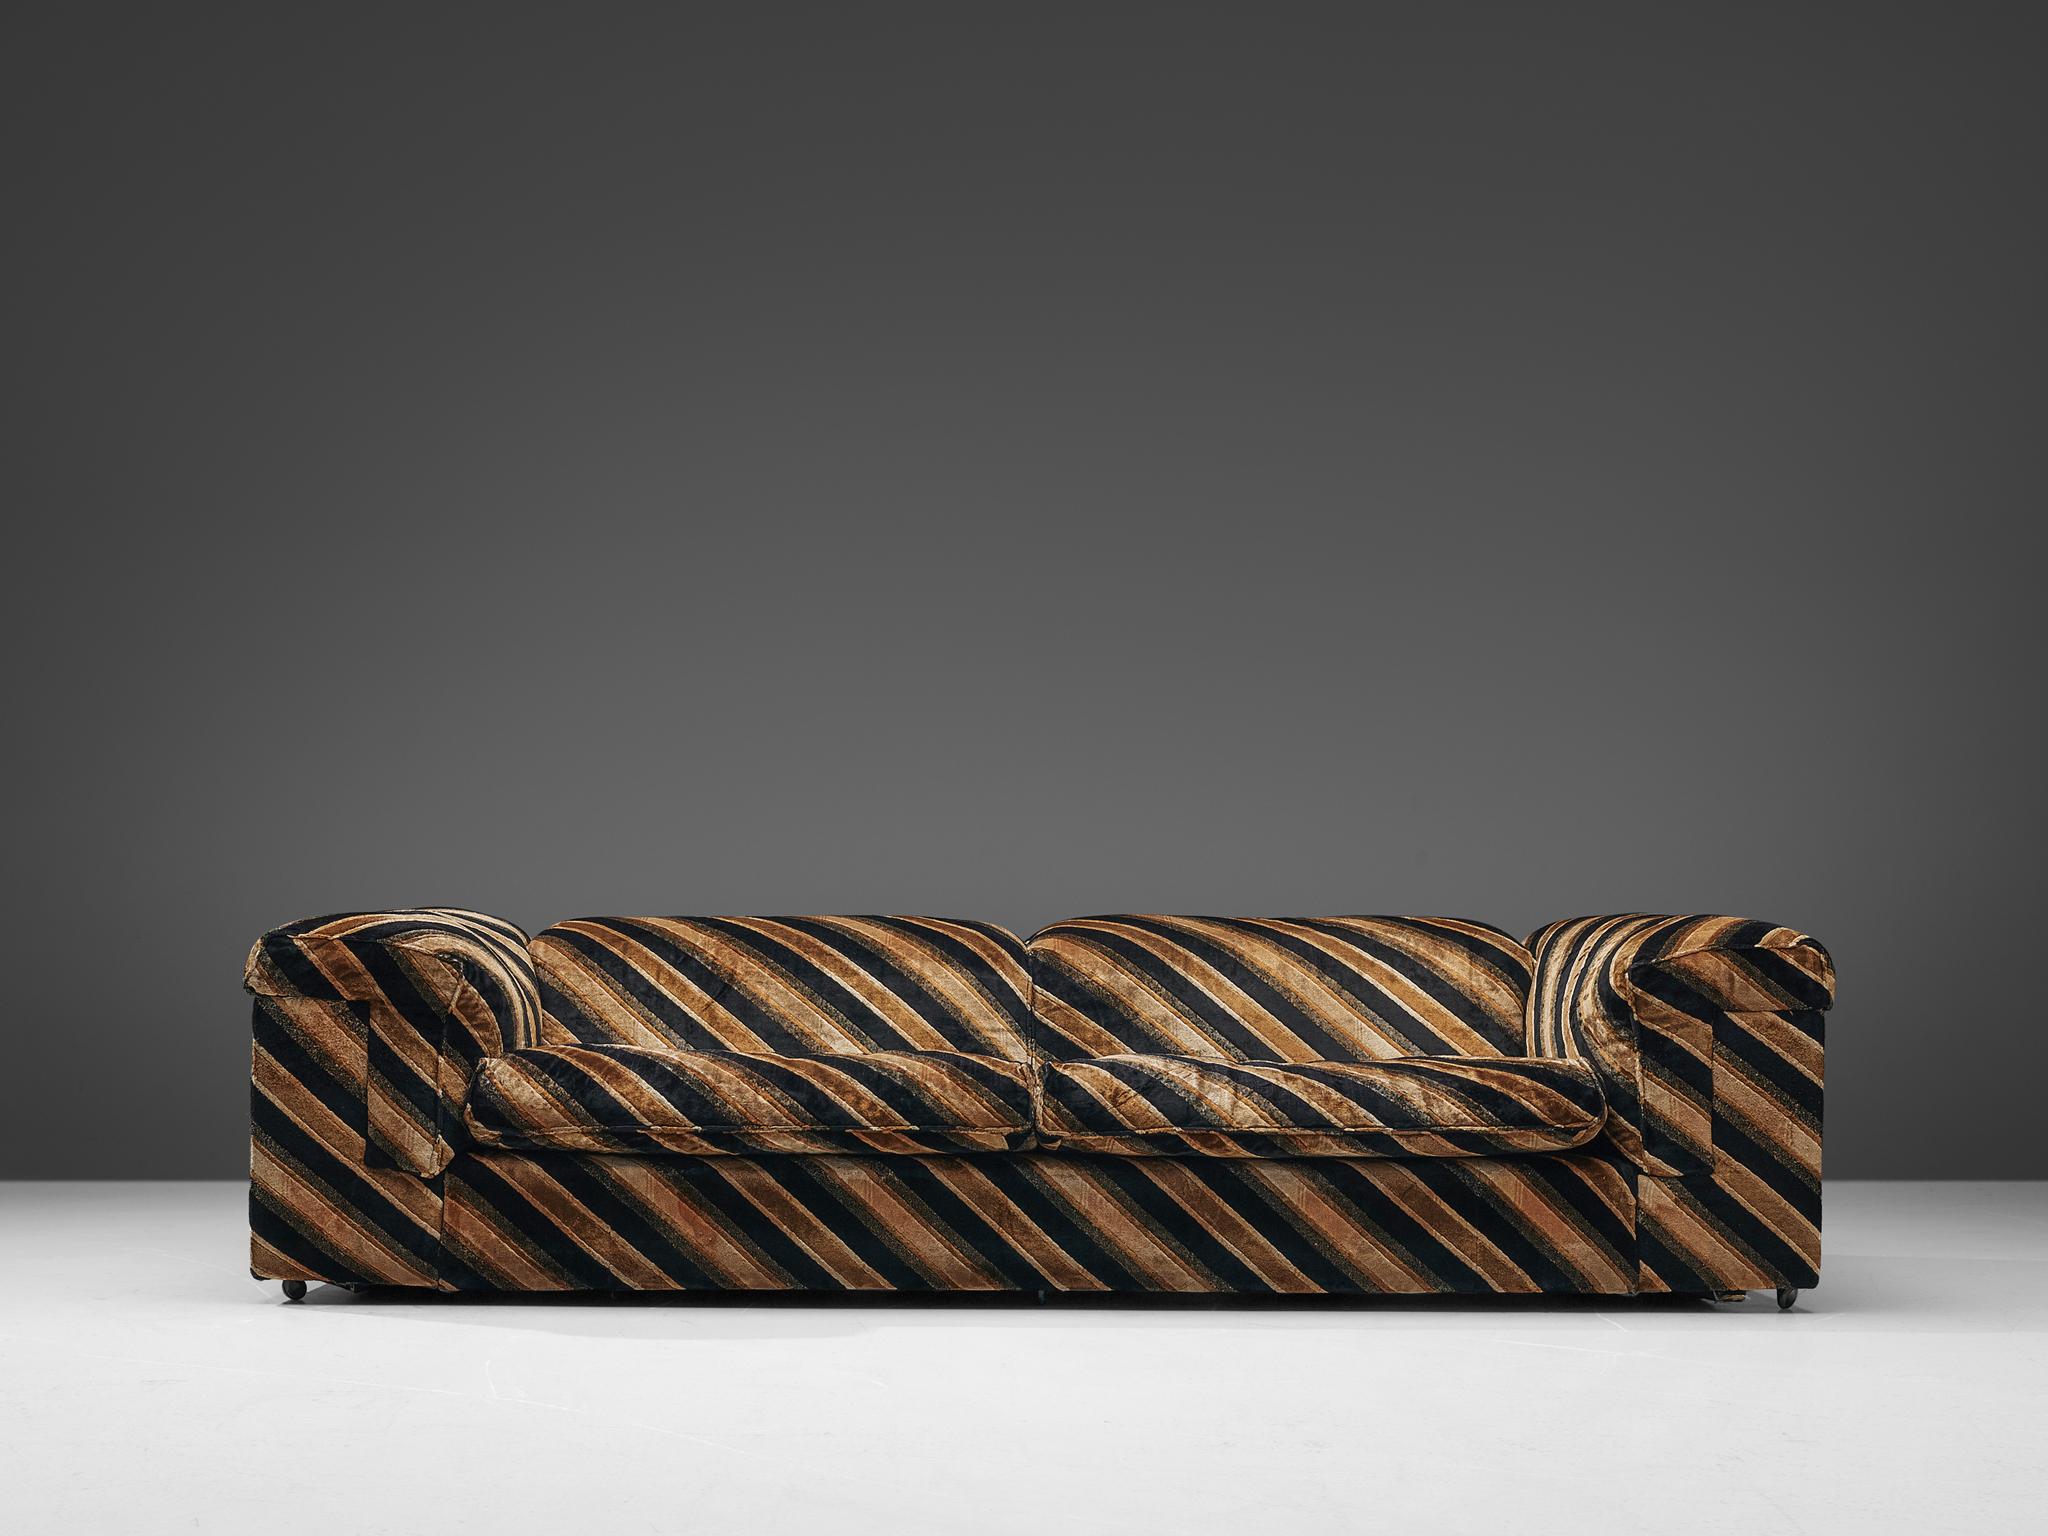 John Home for Howard Keith, 'Diplomat' sofa with ottoman, fabric and metal, United Kingdom, 1980s

Grand voluptuous sofa by Howard Keith for HK Furniture, a later version of the 1970s 'Diplomat' sofa. This sofa with a deep seat is a true delight